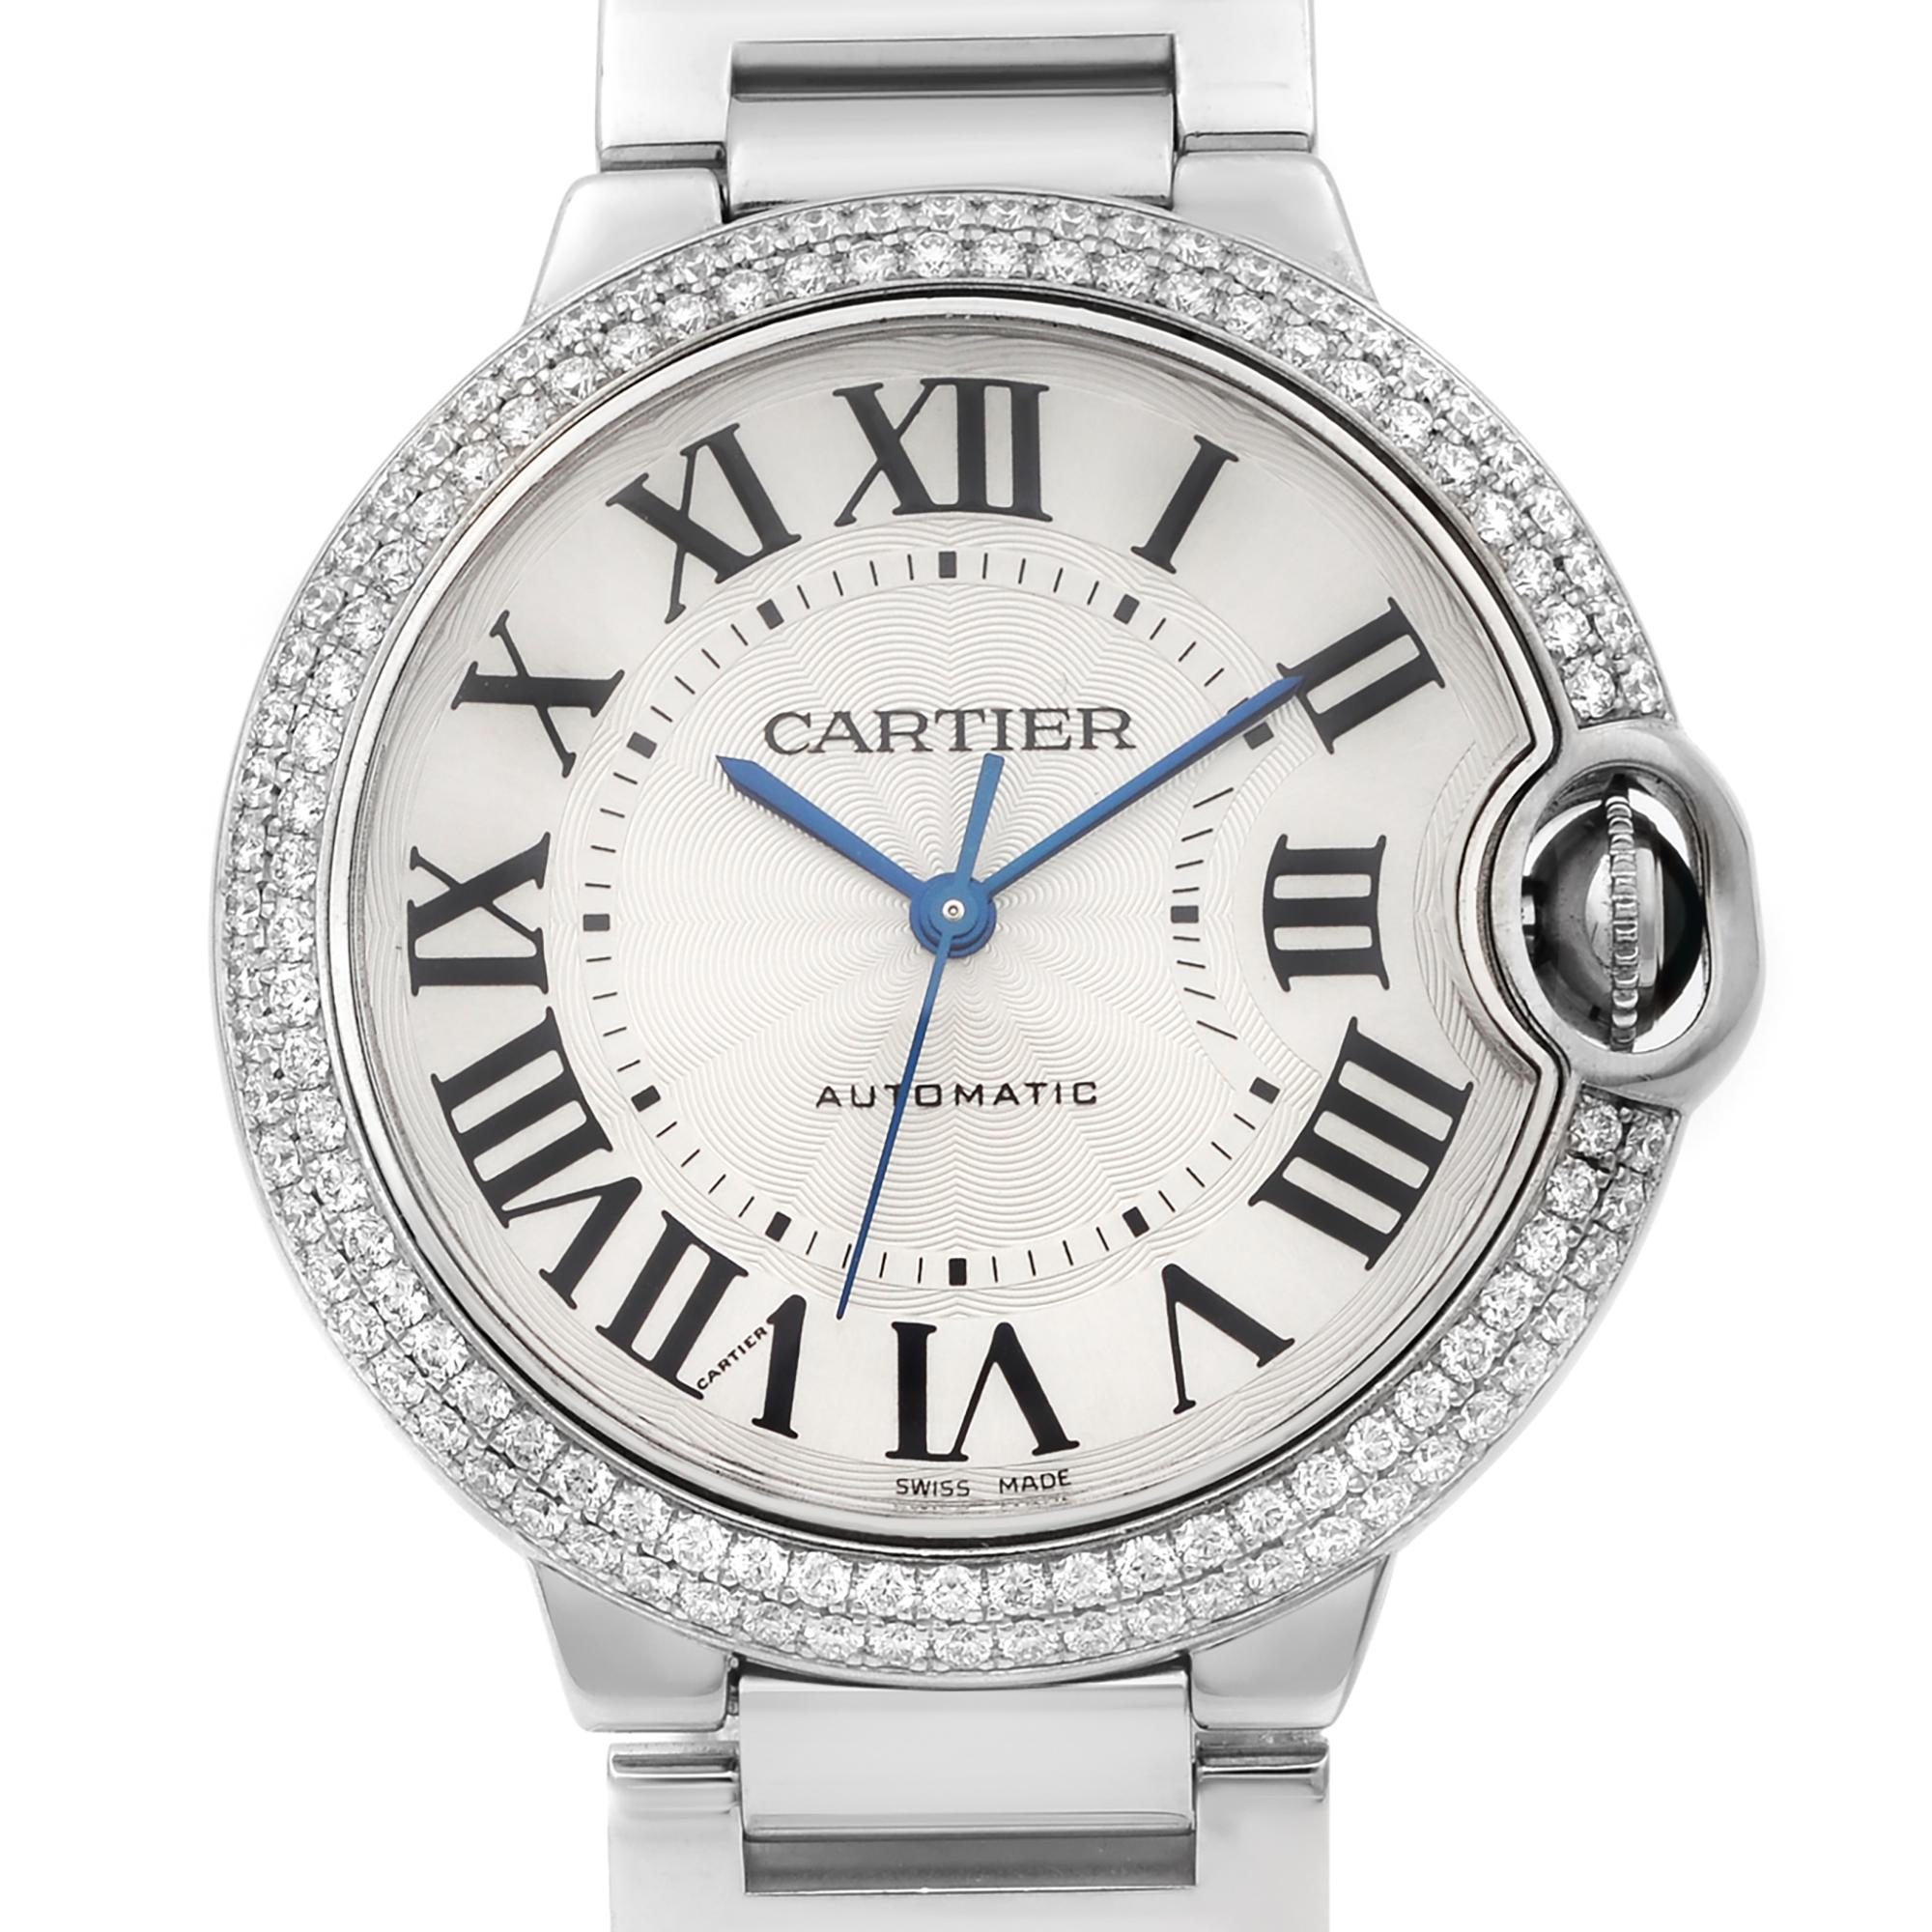 This pre-owned Cartier Ballon Bleu WE9006Z3 is a beautiful Unisex timepiece that is powered by mechanical (automatic) movement which is cased in a white gold case. It has a round shape face, no features dial and has hand roman numerals style